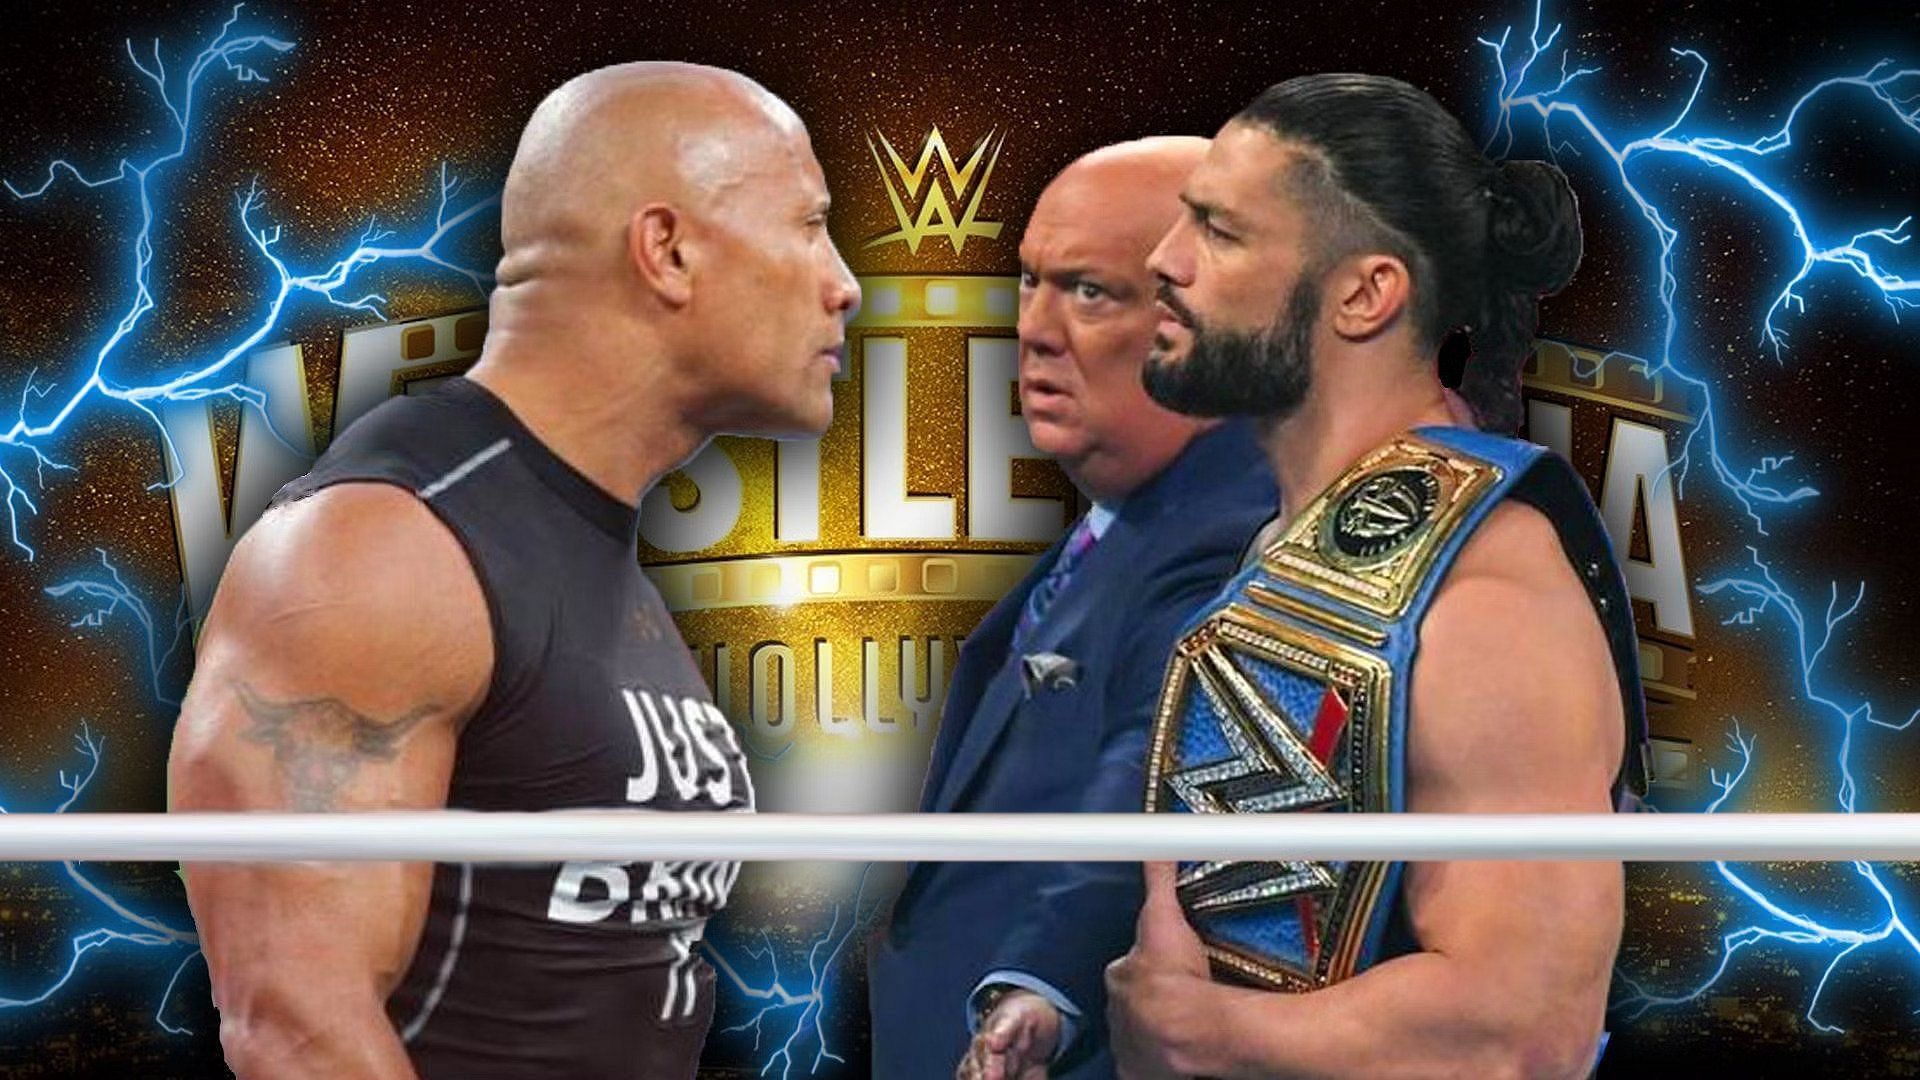 The Rock vs. Roman Reigns is the biggest wrestling match possible in today